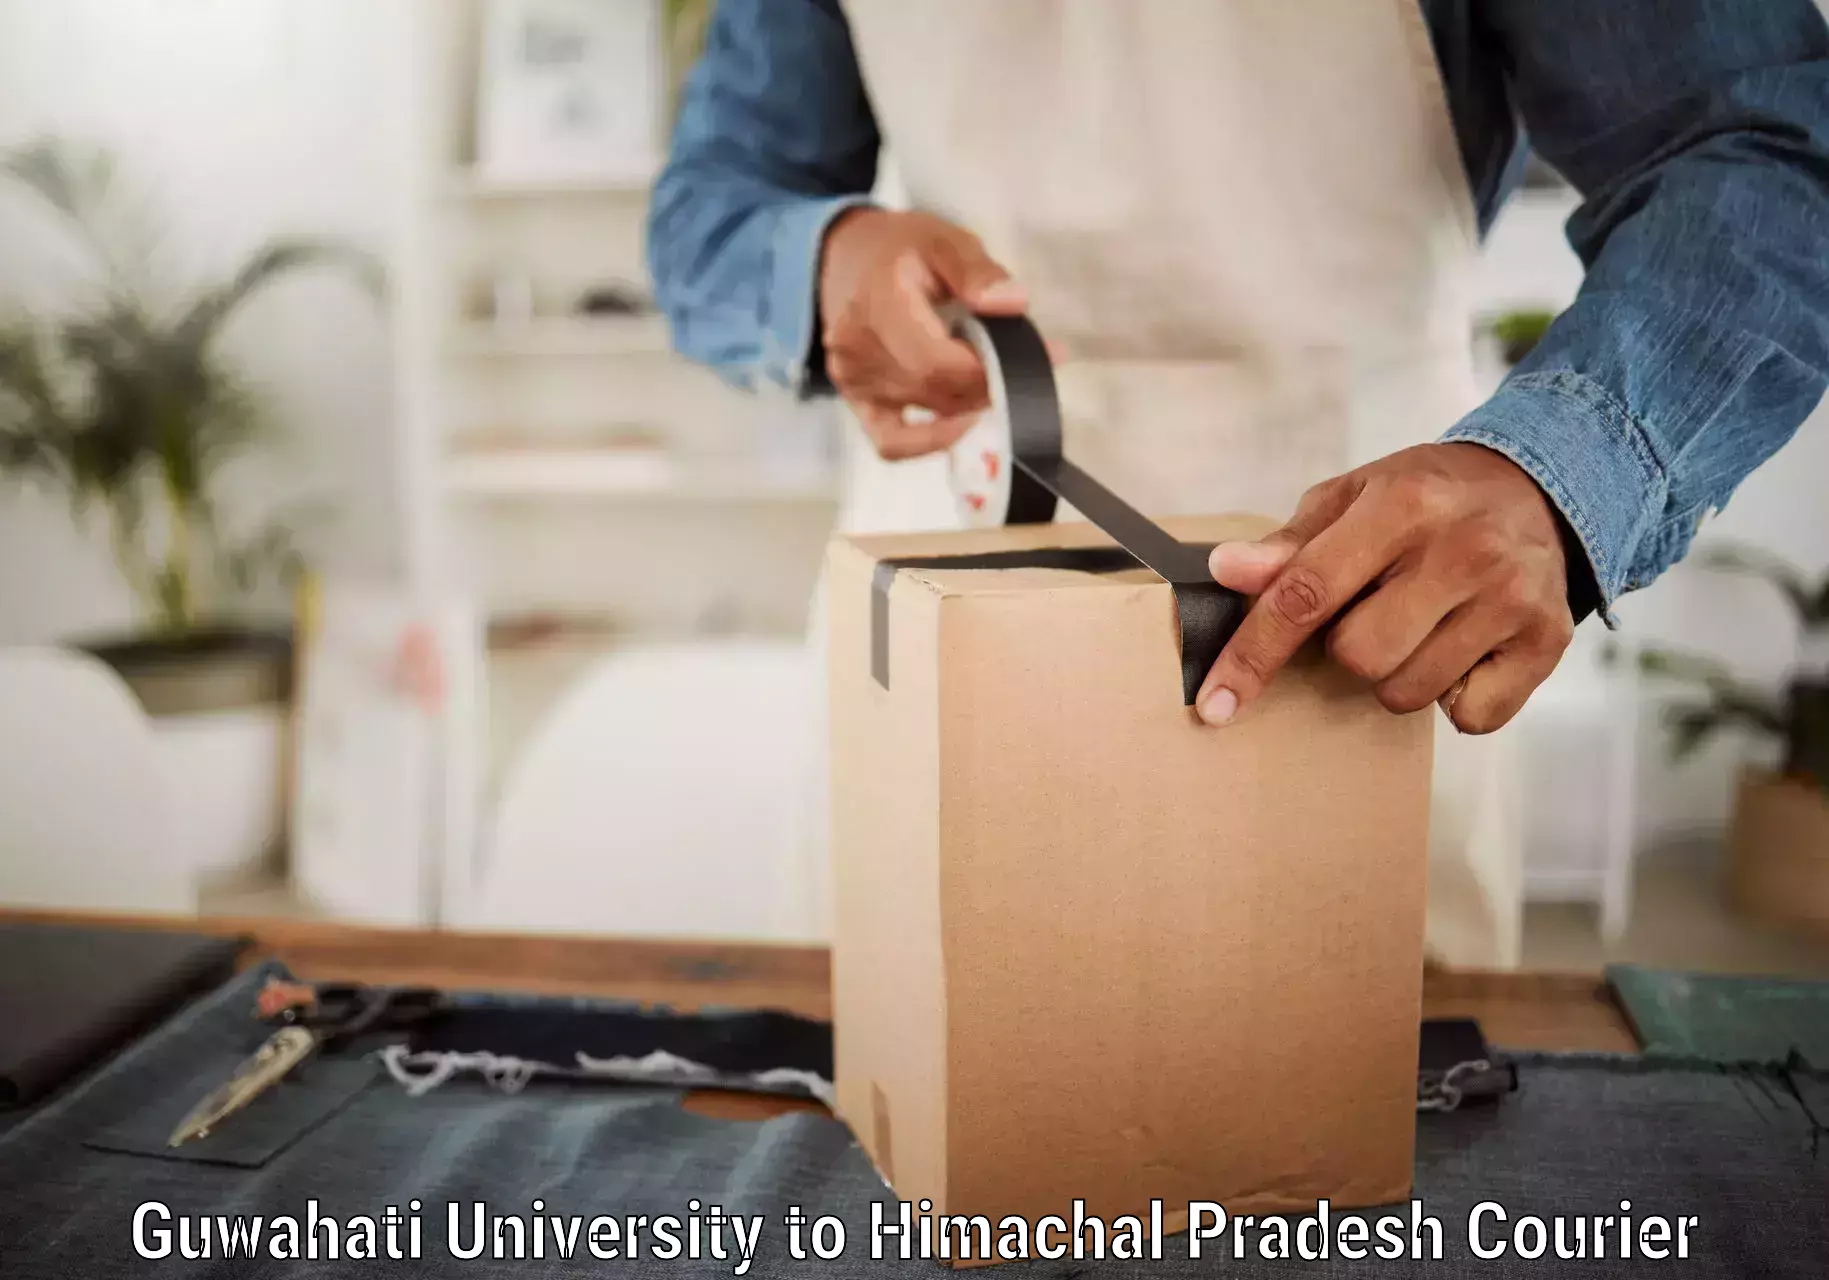 Professional courier services Guwahati University to Nagwain